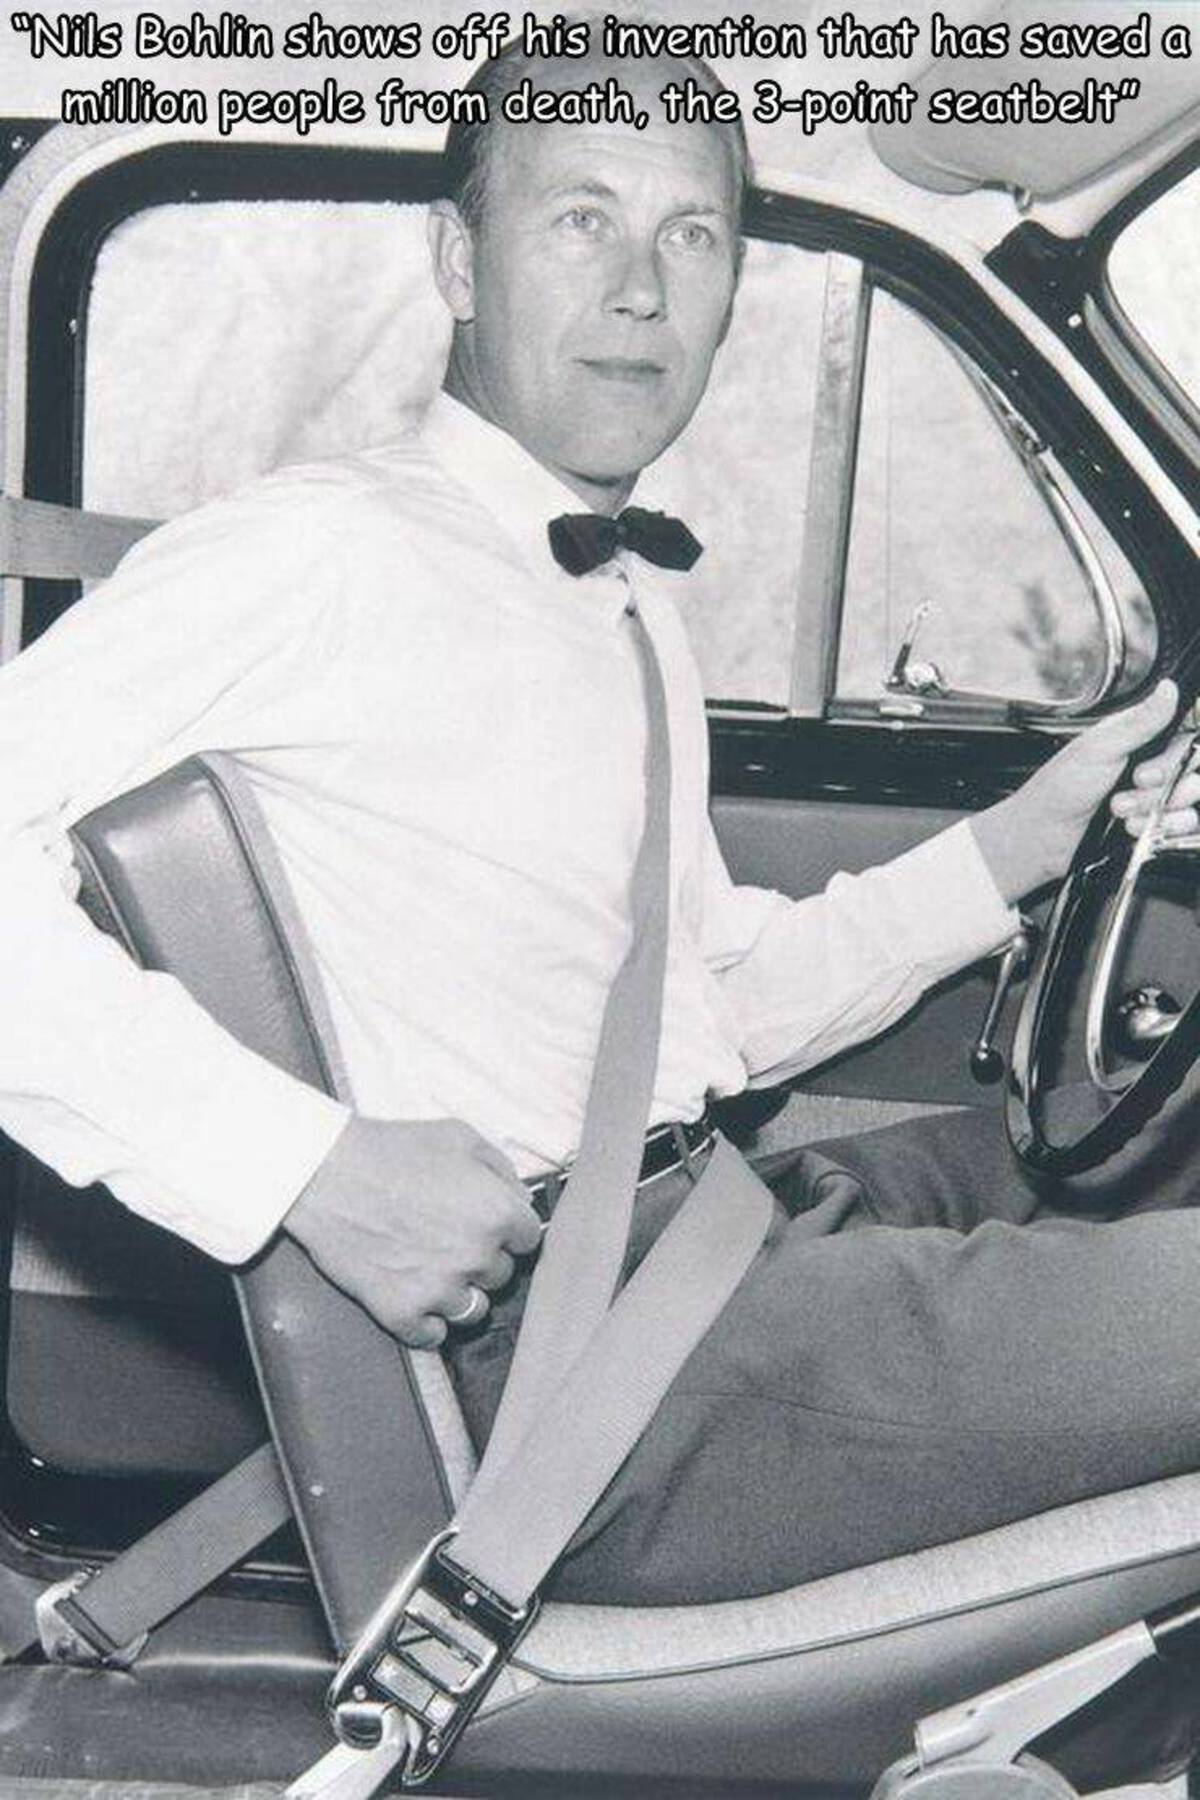 first seatbelt - "Nils Bohlin shows off his invention that has saved a million people from death, the 3point seatbelt"